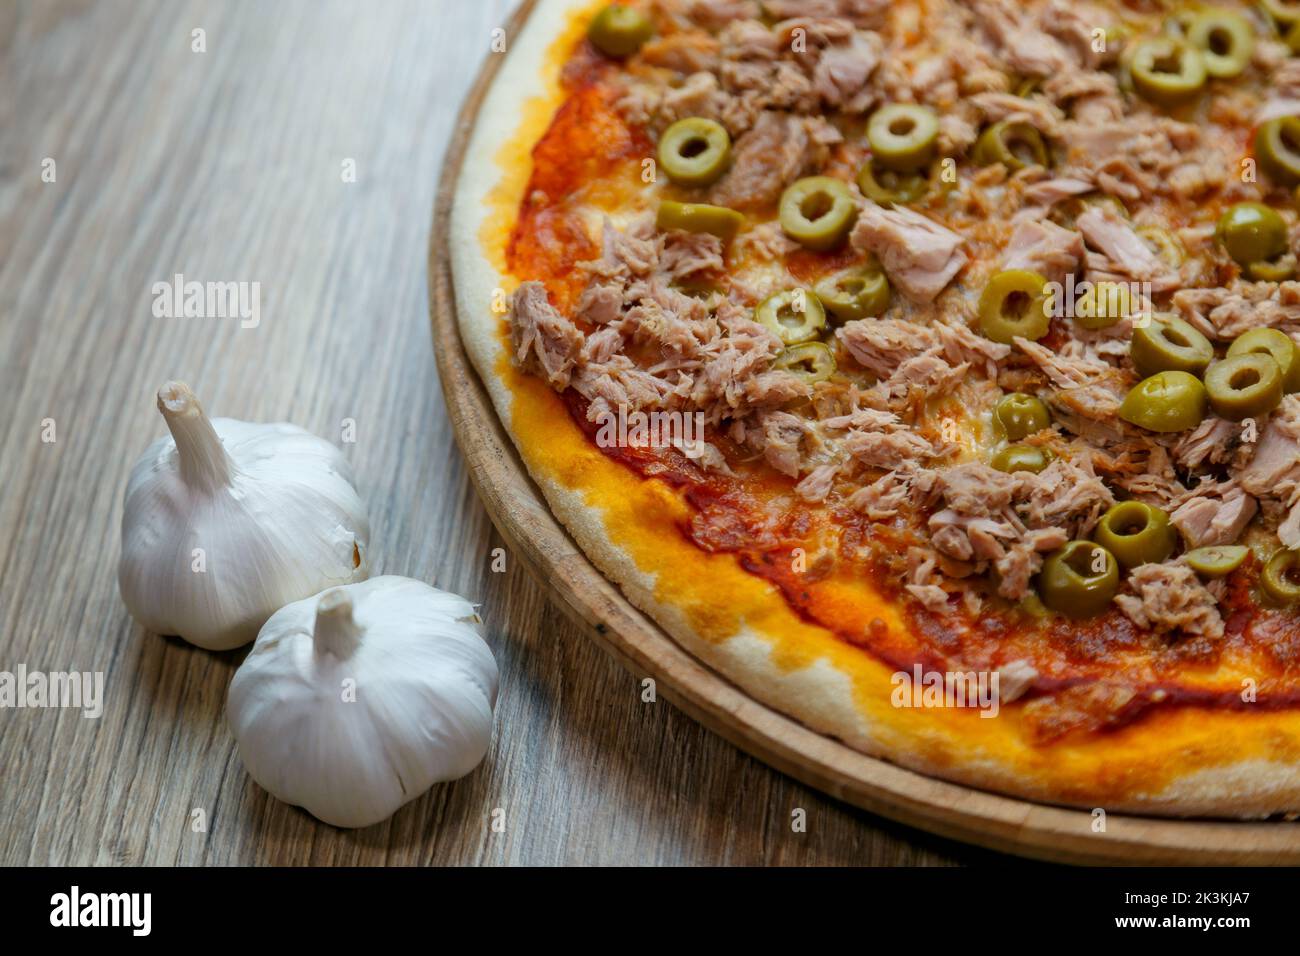 A closeup shot of crusty Italian pizza with meat, green olives, and garlic on the wooden table Stock Photo